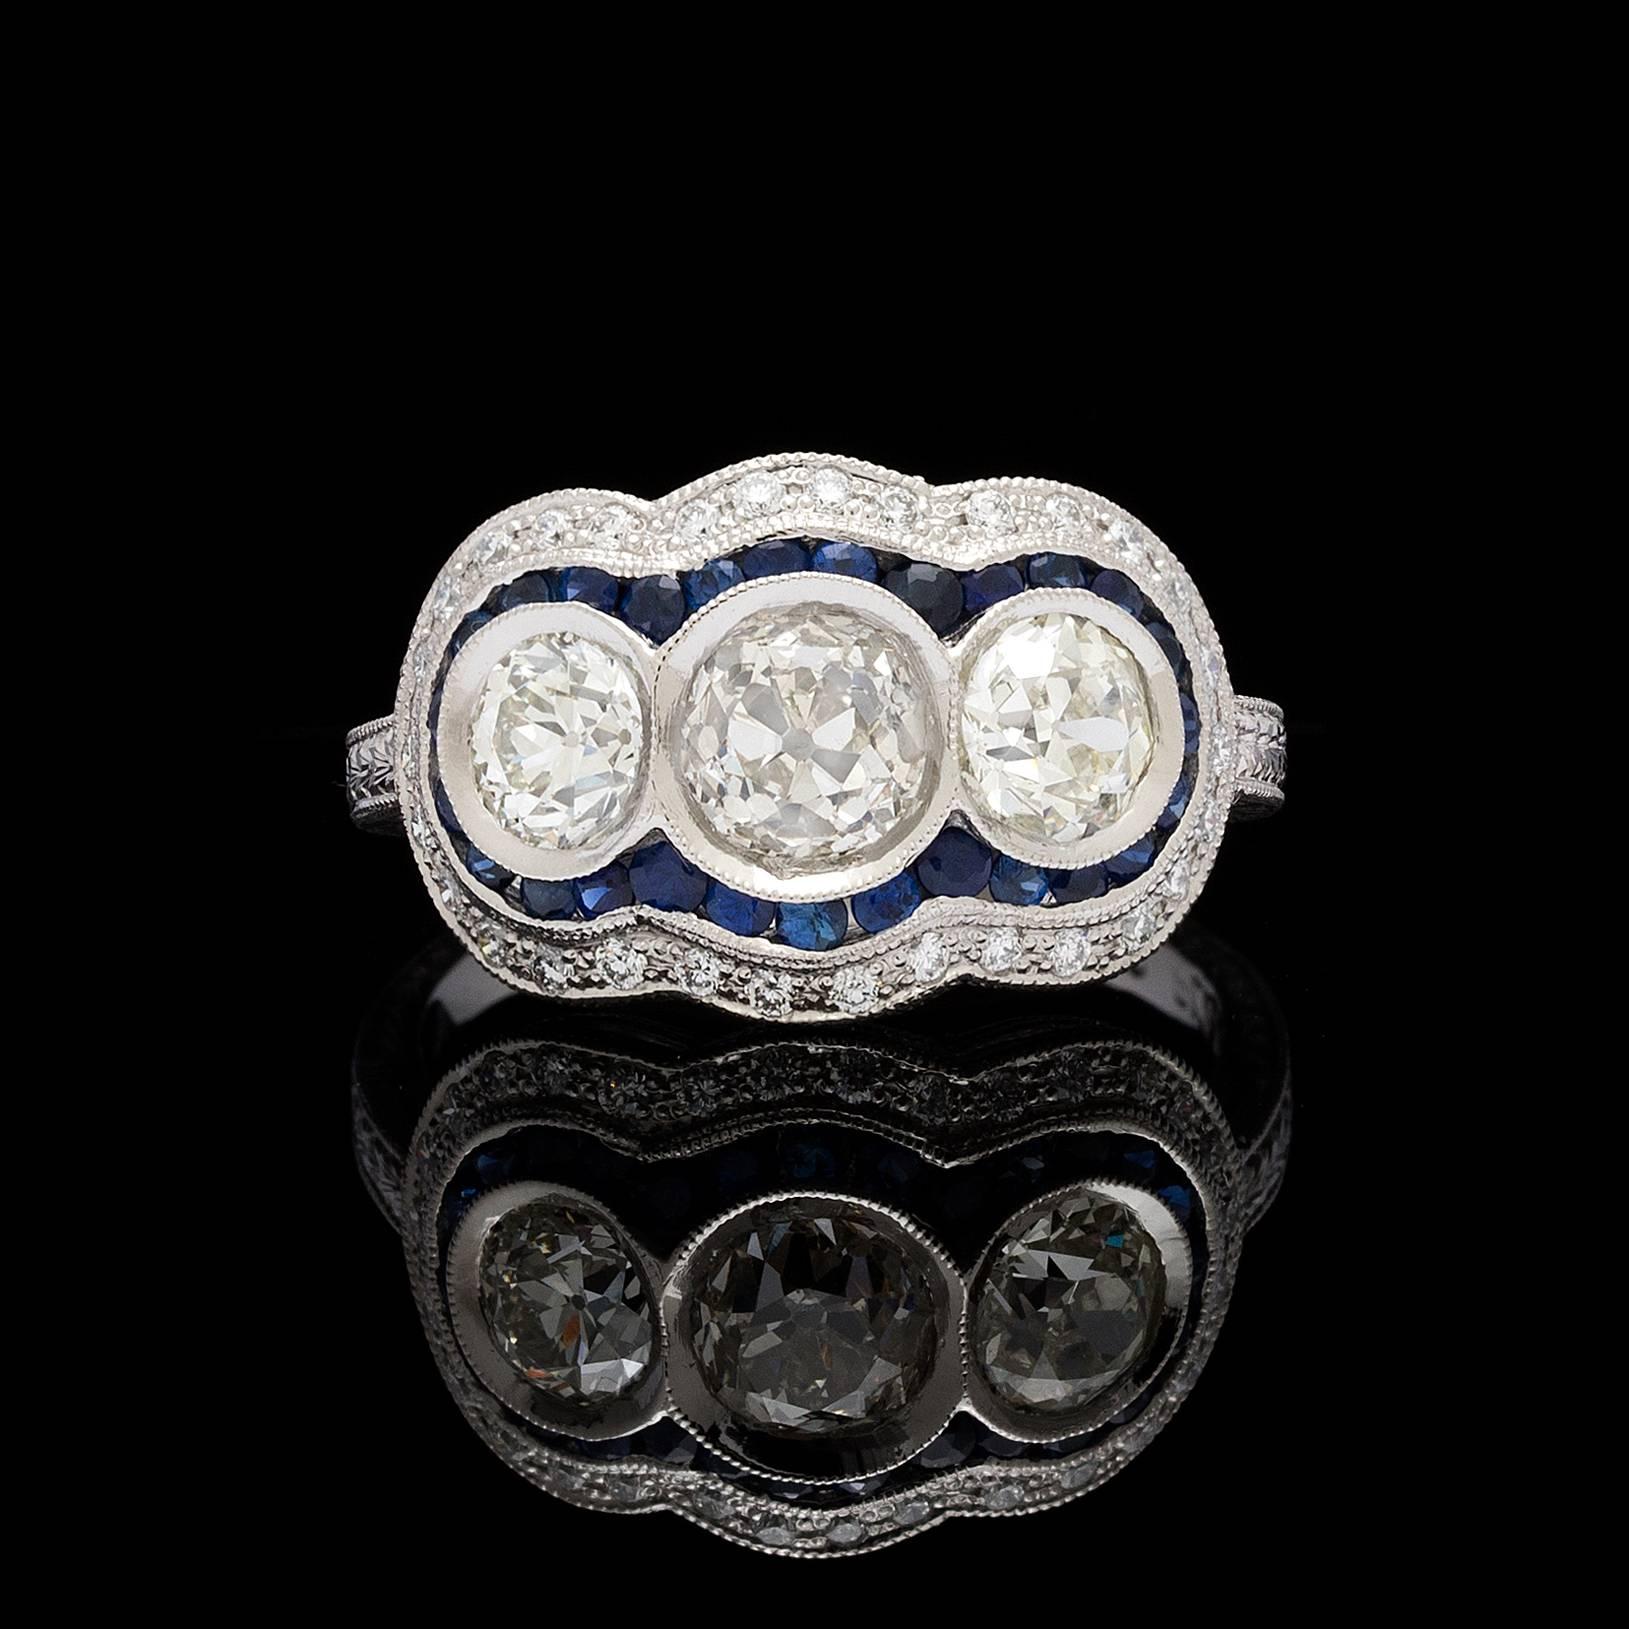 Platinum Art Deco style ring features 3 old european cut diamonds, the center is 0.86 carats and 2 sides are 0.97 carats for a total of 1.83 carats. The ring is detailed with 0.20 carats of round brilliant cut diamonds and 0.54 carats of blue